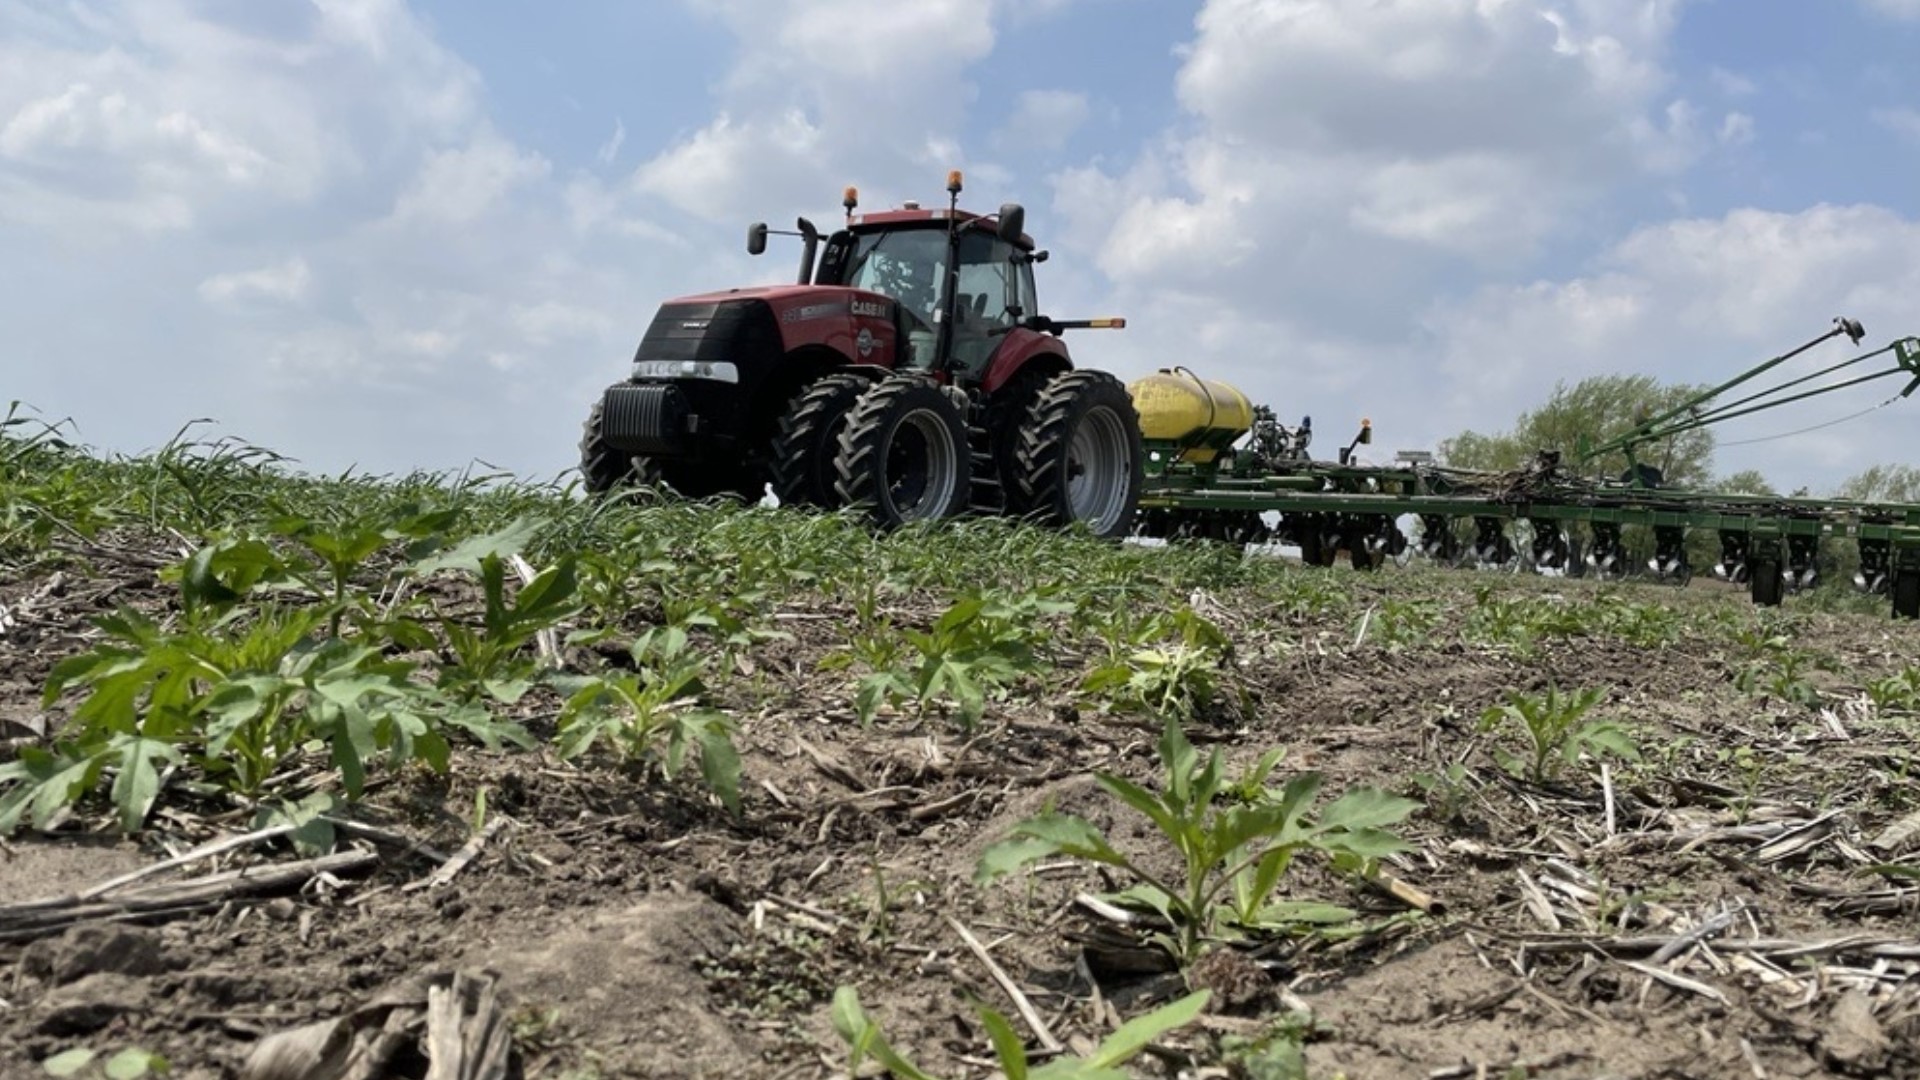 Typically, local planting seasons begin in mid-April. However, one Illinois farmer says he's not worried about the late start impacting his crop yields.